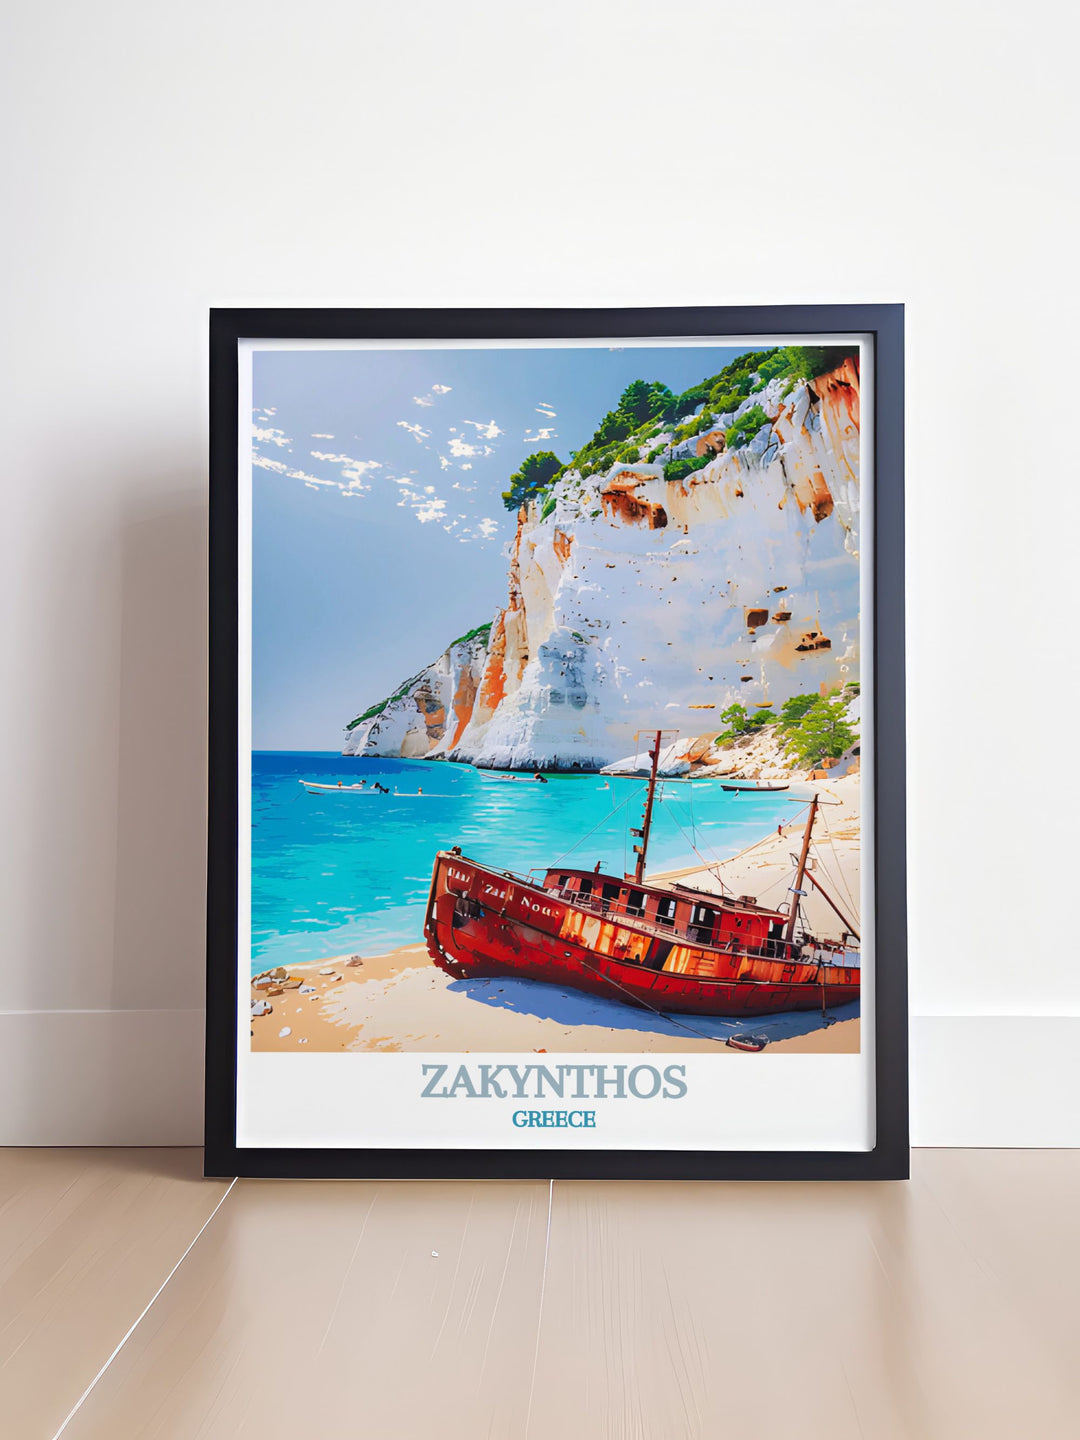 Navagio Beach Prints showcasing the idyllic shores and peaceful atmosphere of Zakynthos, perfect for bringing a touch of Greek island magic to your wall art collection.